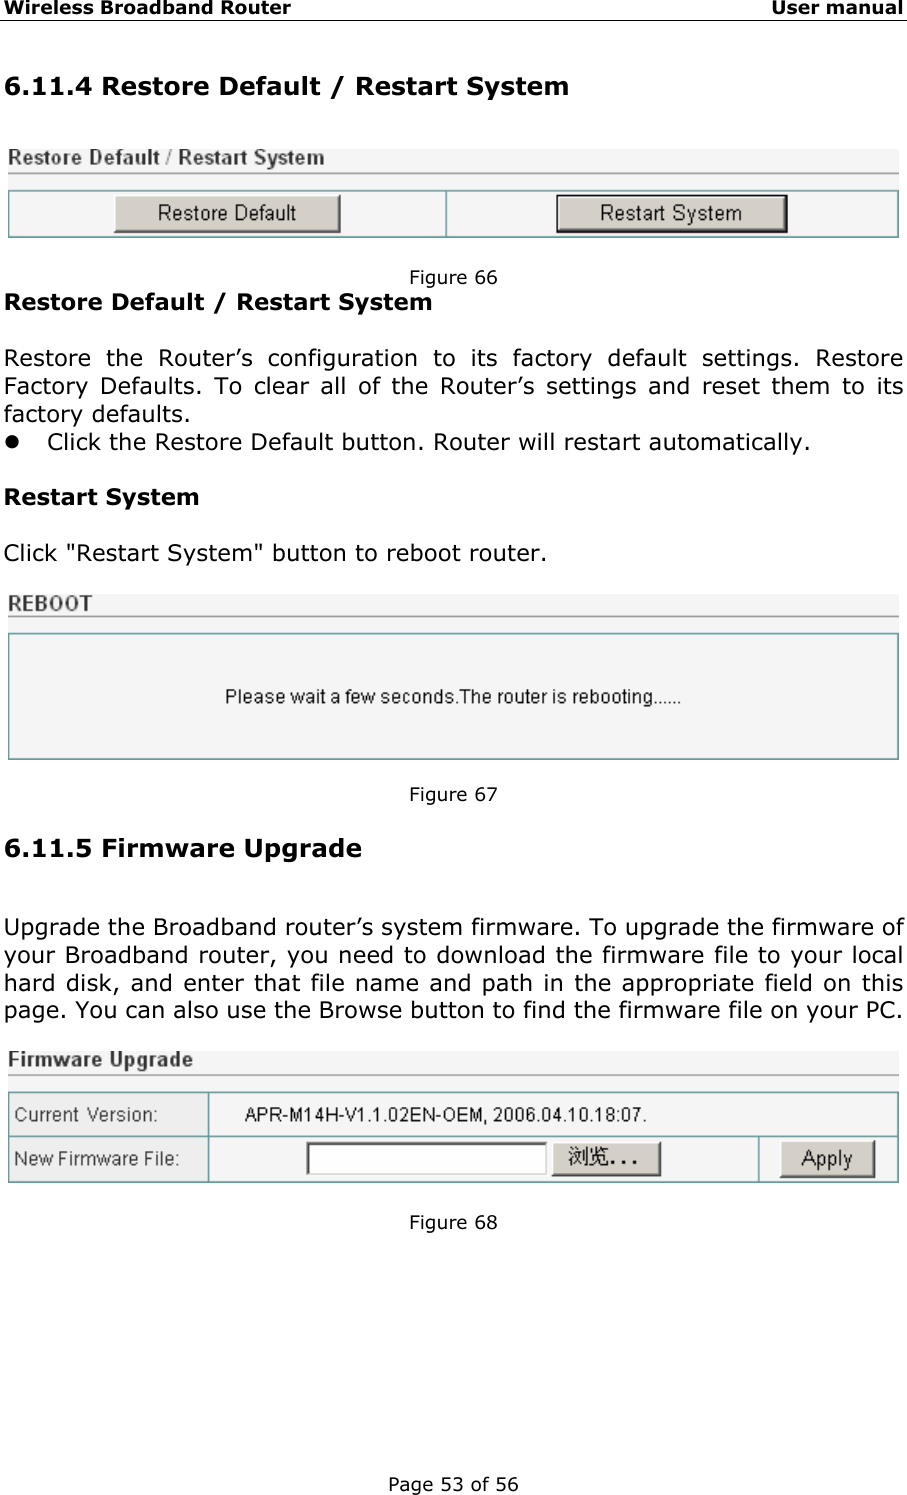 Wireless Broadband Router                                                   User manual Page 53 of 56 6.11.4 Restore Default / Restart System   Figure 66 Restore Default / Restart System  Restore the Router’s configuration to its factory default settings. Restore Factory Defaults. To clear all of the Router’s settings and reset them to its factory defaults.   z Click the Restore Default button. Router will restart automatically.    Restart System  Click &quot;Restart System&quot; button to reboot router.    Figure 67 6.11.5 Firmware Upgrade Upgrade the Broadband router’s system firmware. To upgrade the firmware of your Broadband router, you need to download the firmware file to your local hard disk, and enter that file name and path in the appropriate field on this page. You can also use the Browse button to find the firmware file on your PC.    Figure 68       